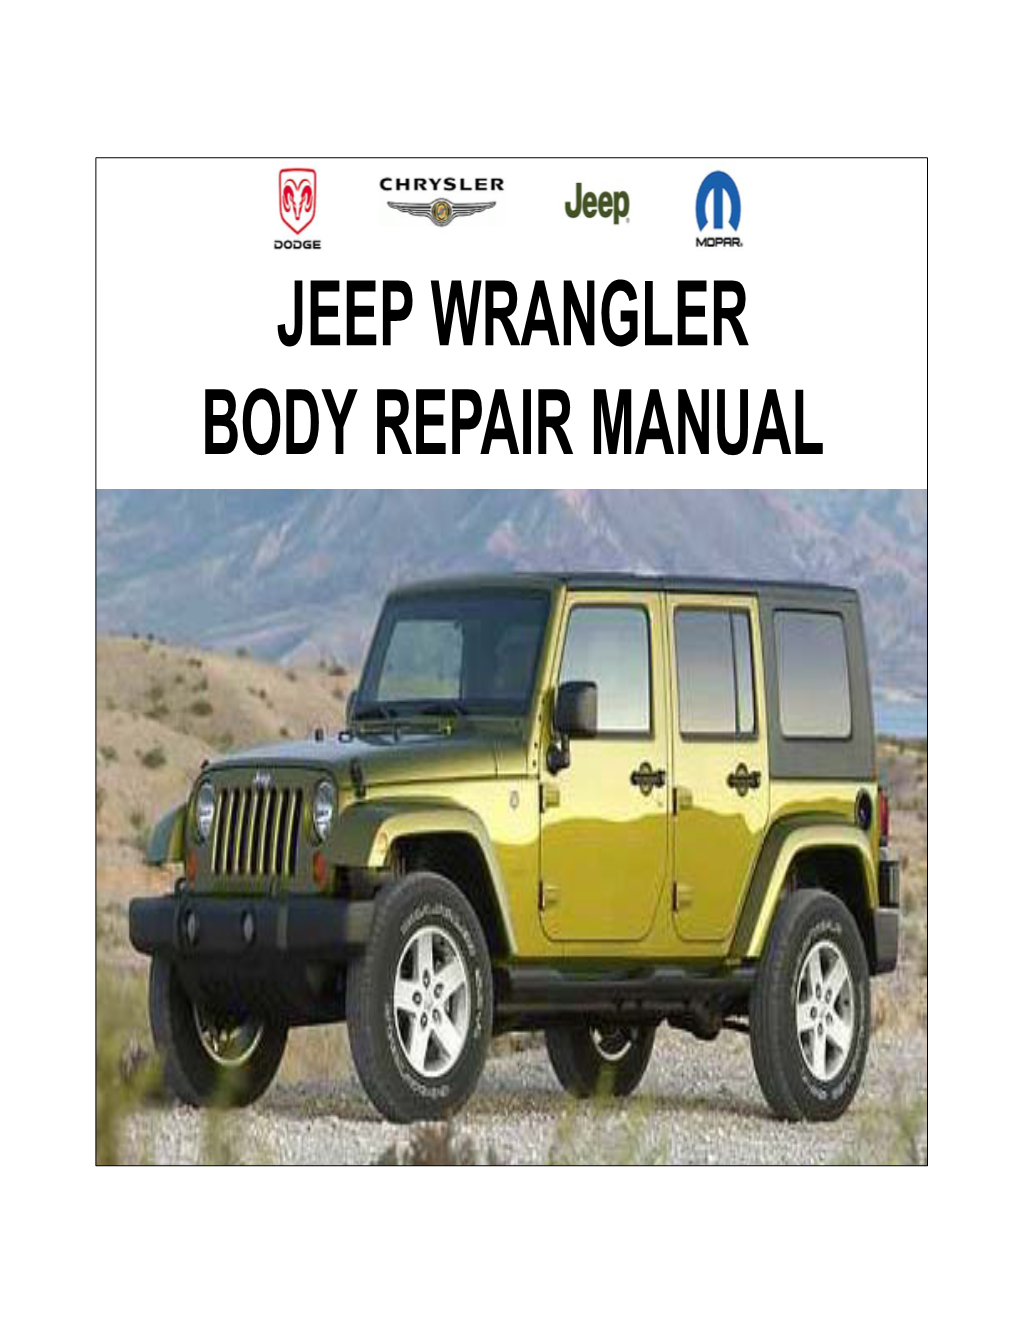 Jeep Wrangler Body Repair Manual Safety Notice